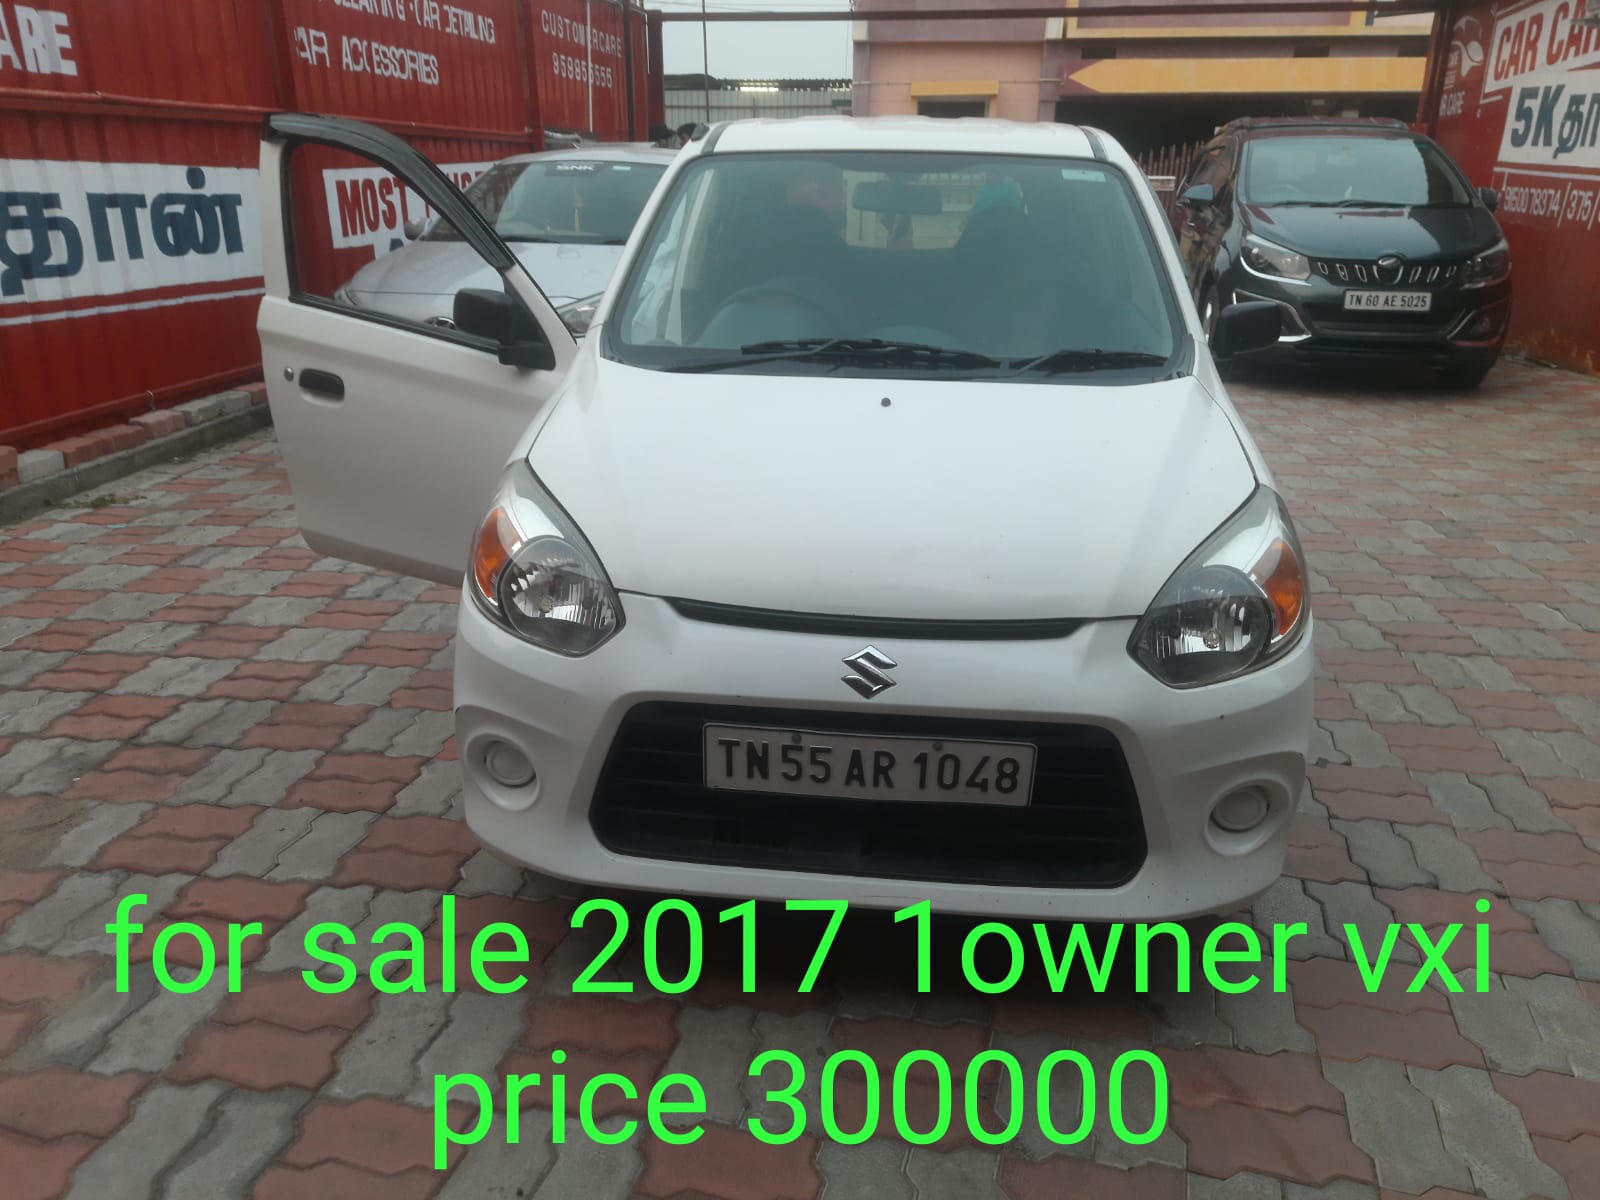 5210-for-sale-Maruthi-Suzuki-Alto-800-Petrol-First-Owner-2017-TN-registered-rs-300000